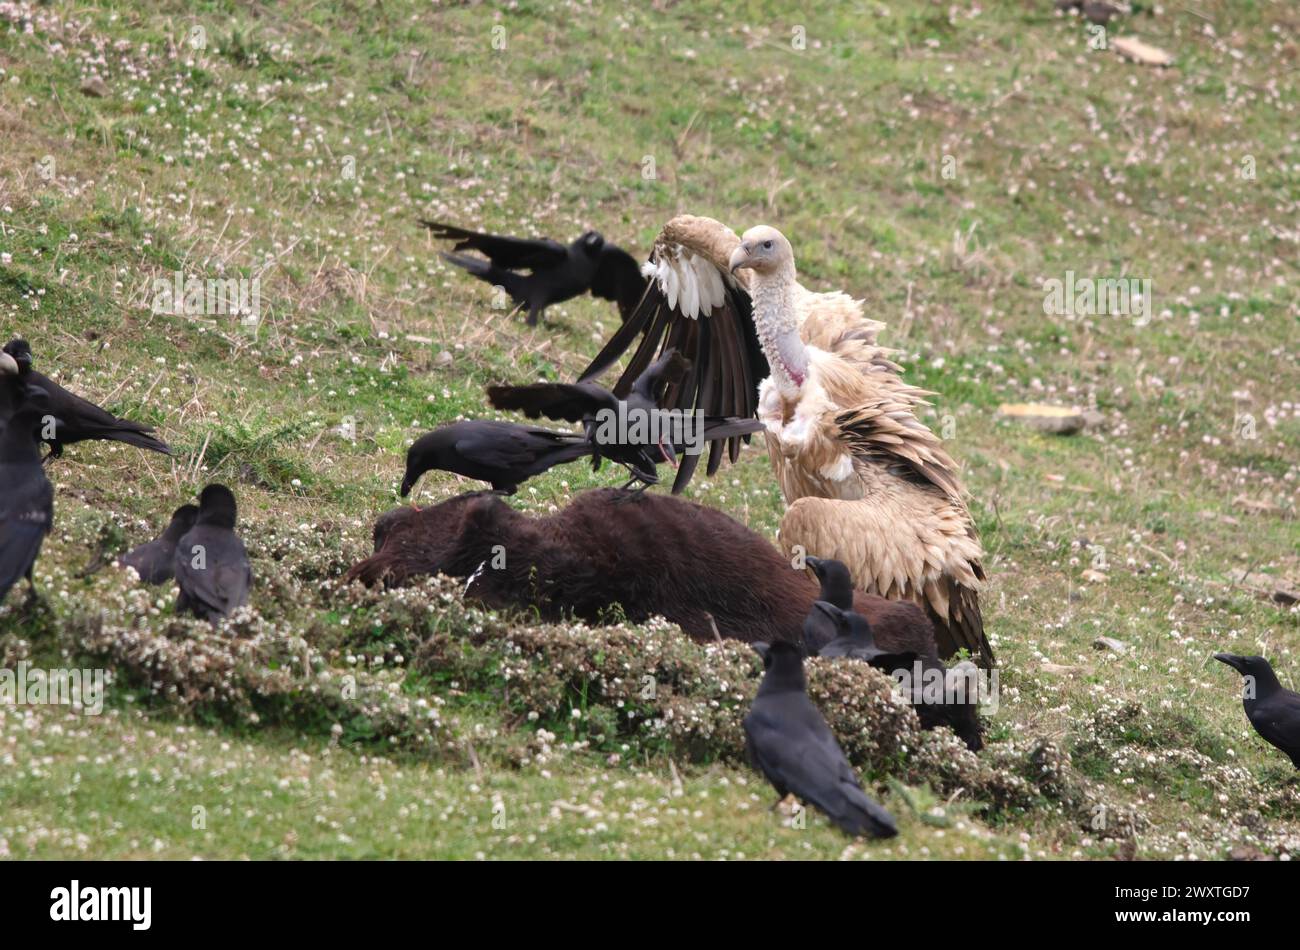 Himalayan vulture (Gyps himalayensis) and Large-billed crows (Corvus macrorhynchos) scavenging on a carcass at Auli in Uttarakhand, India Stock Photo